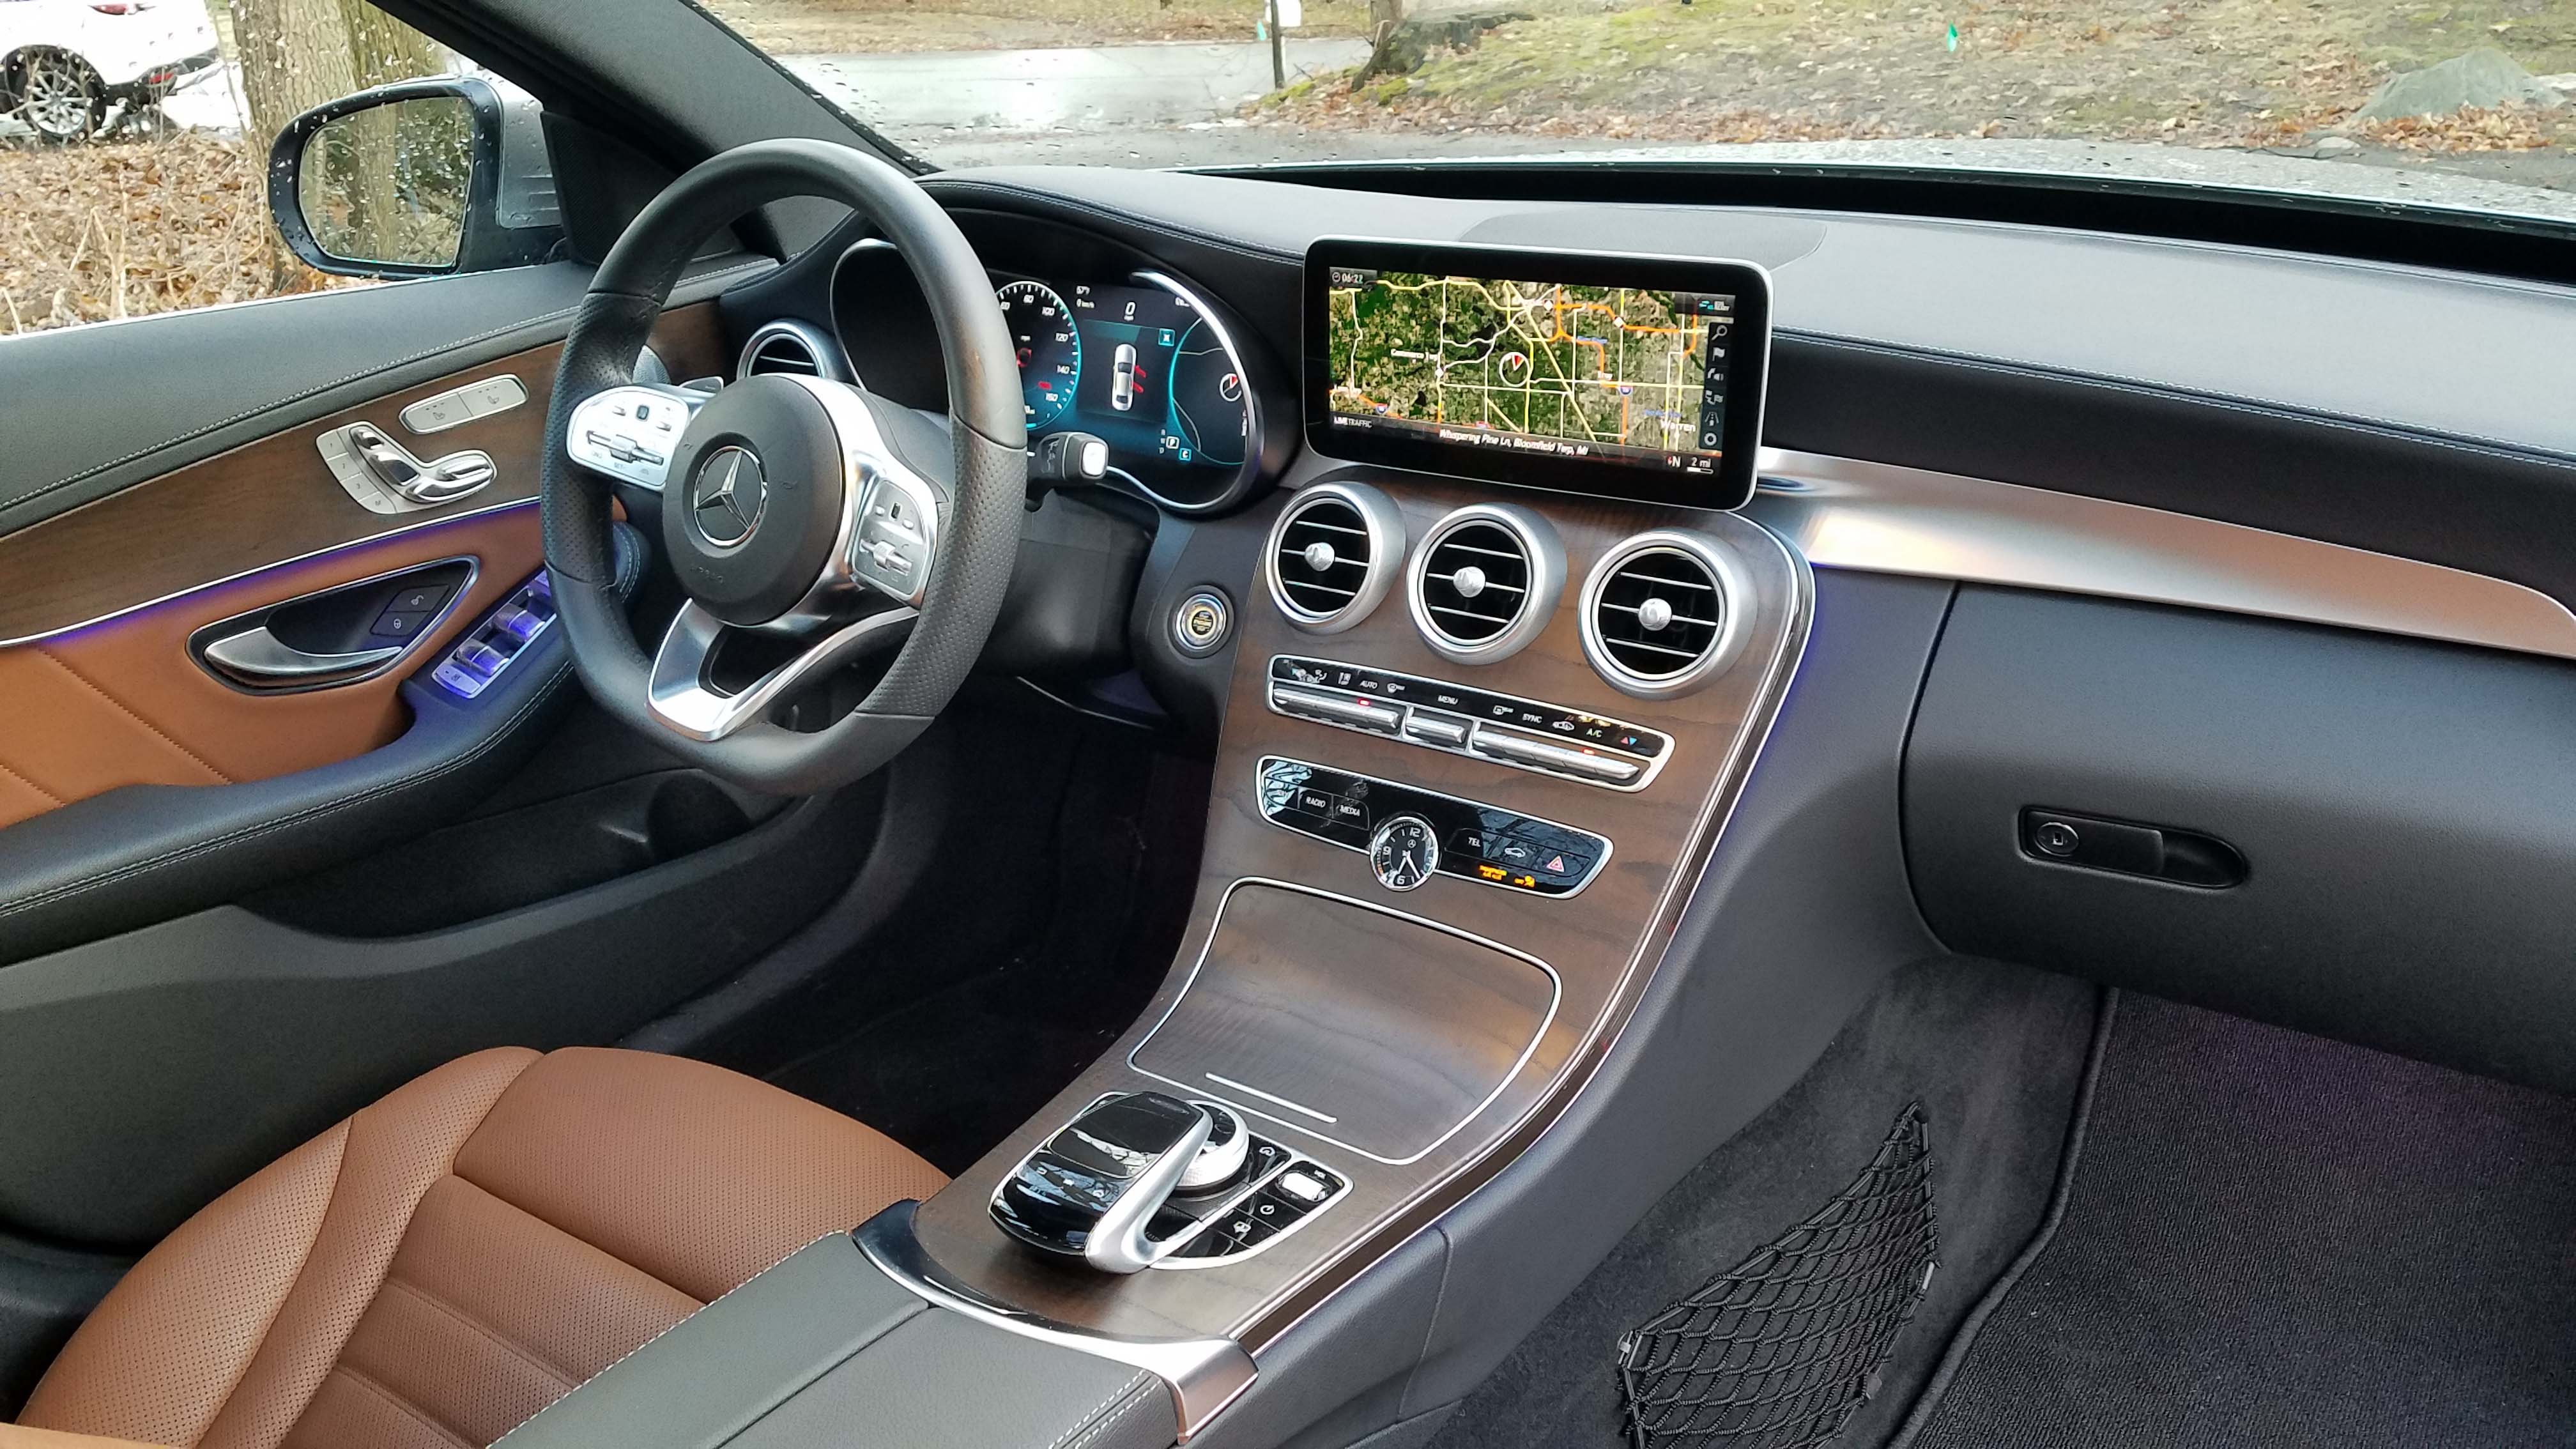 The interior of the 2019 Mercedes C300 is the best in luxury with ornate decoration and controls — and premium materials.